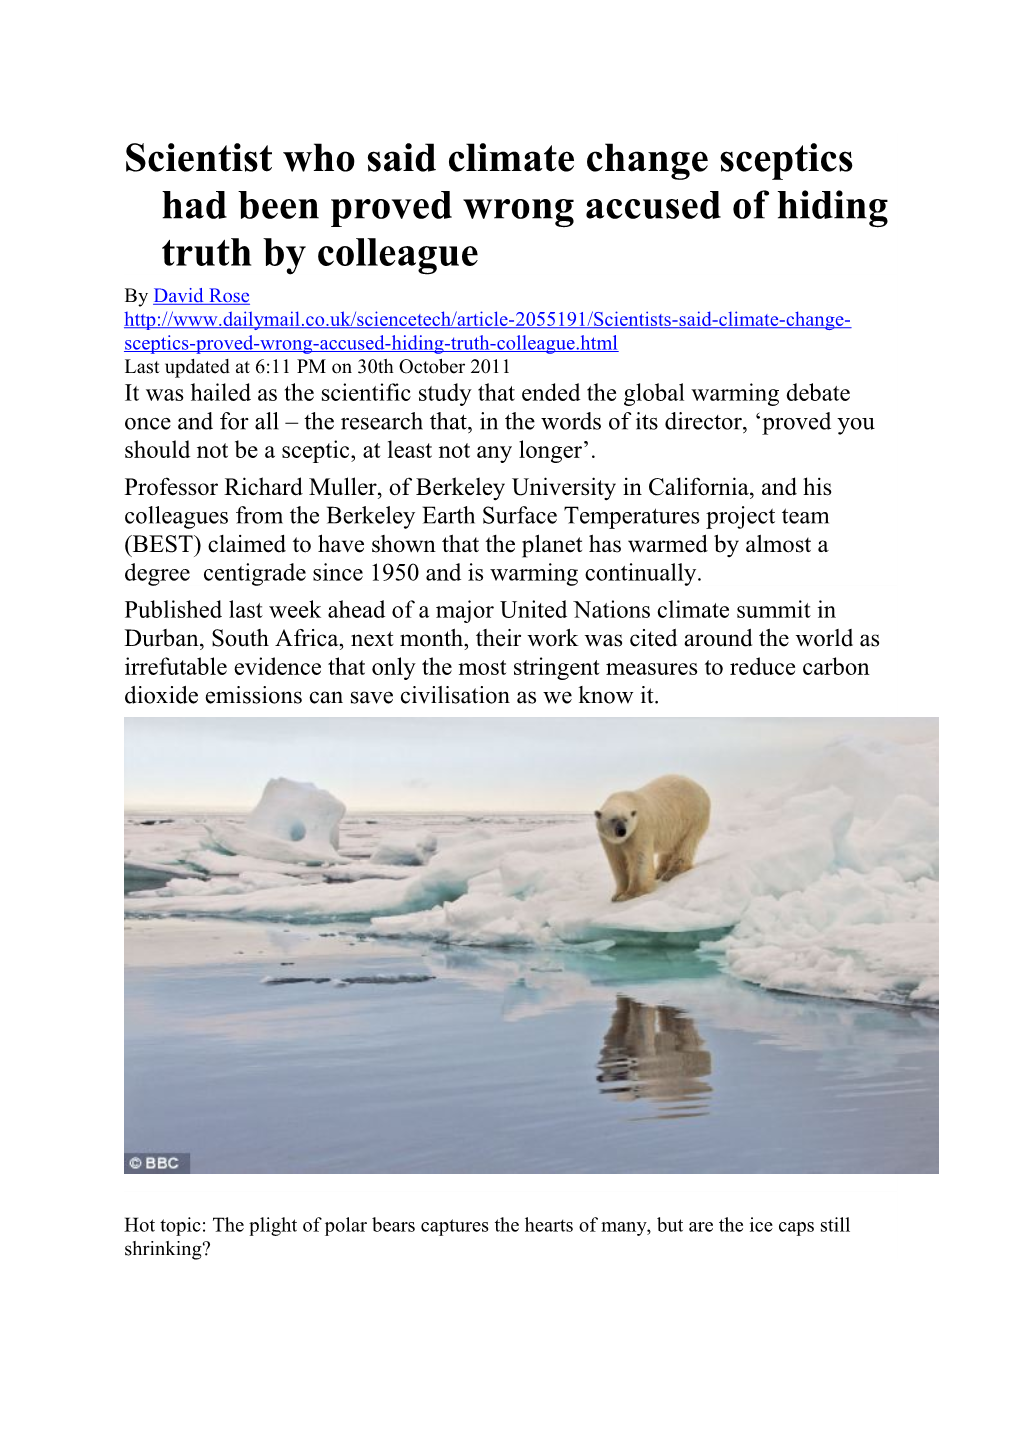 Scientist Who Said Climate Change Sceptics Had Been Proved Wrong Accused of Hiding Truth